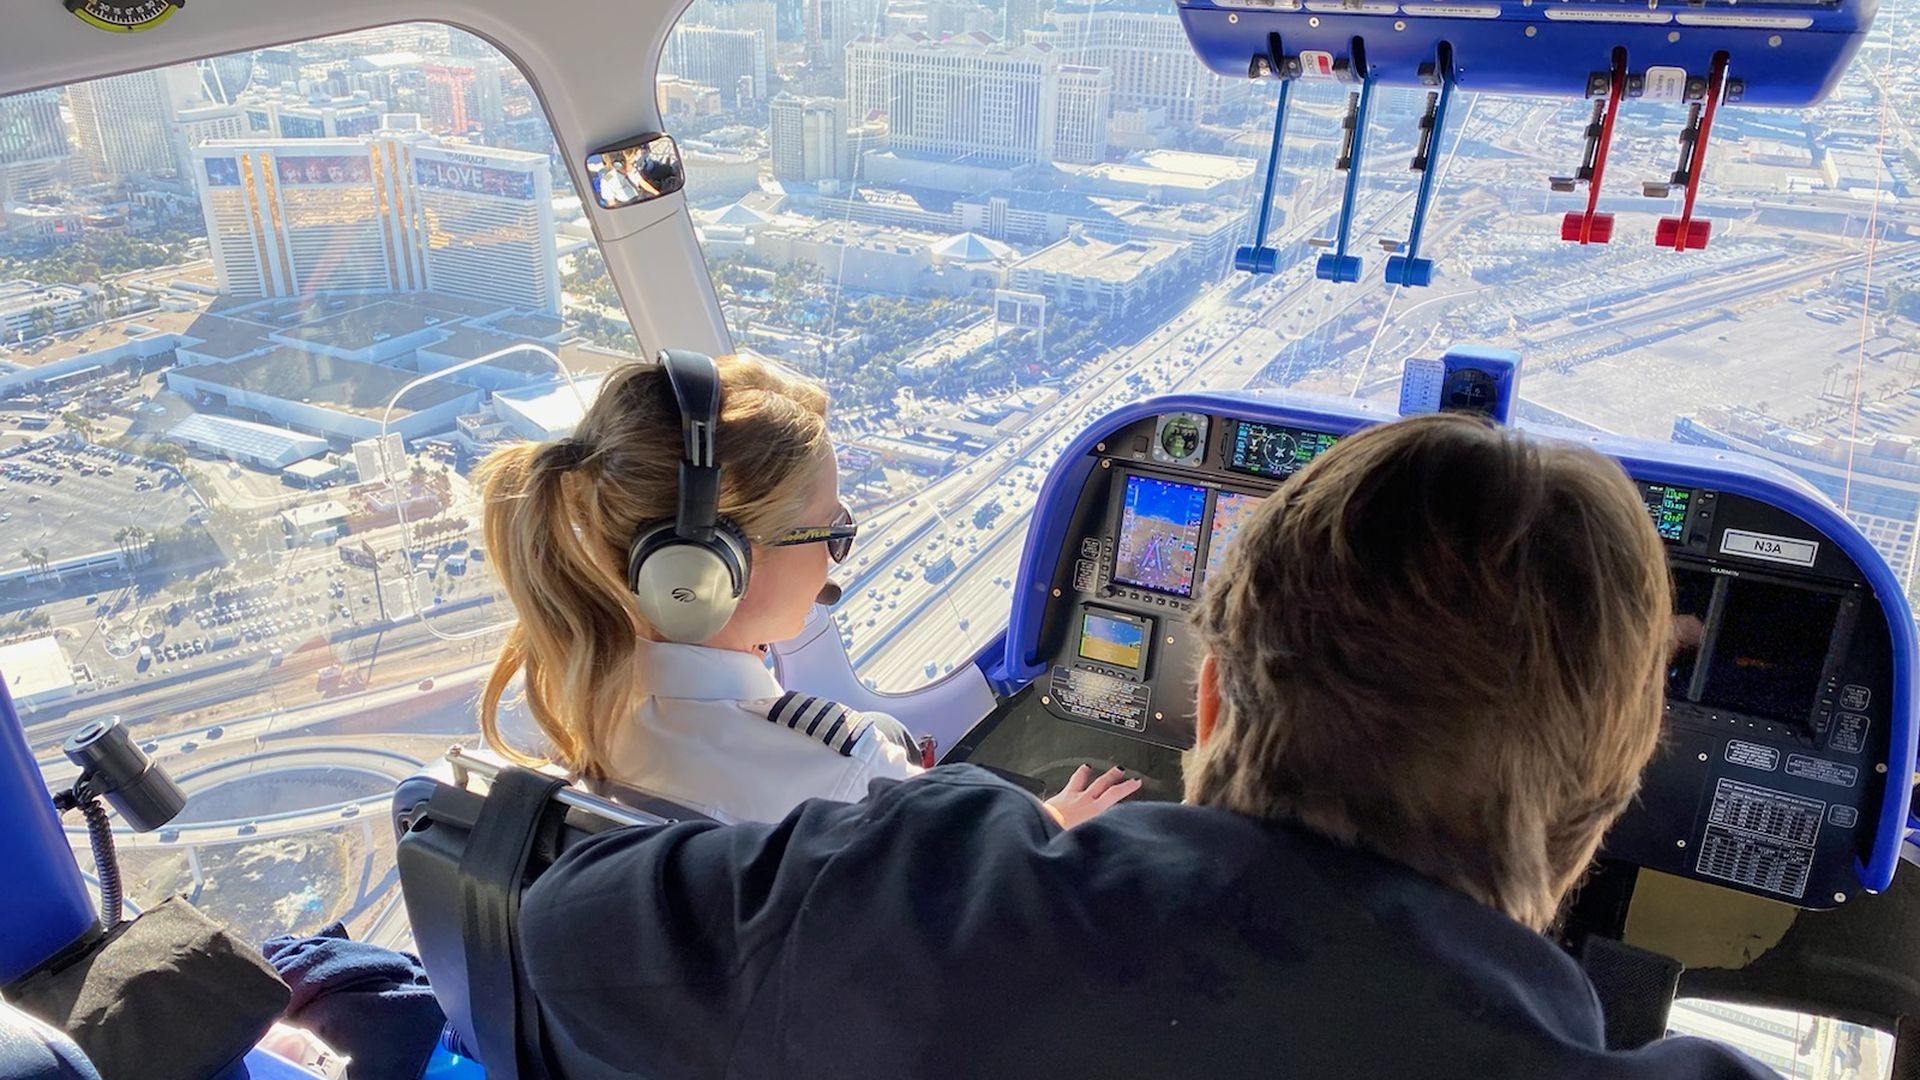 Image of me learning how to pilot a Goodyear blimp